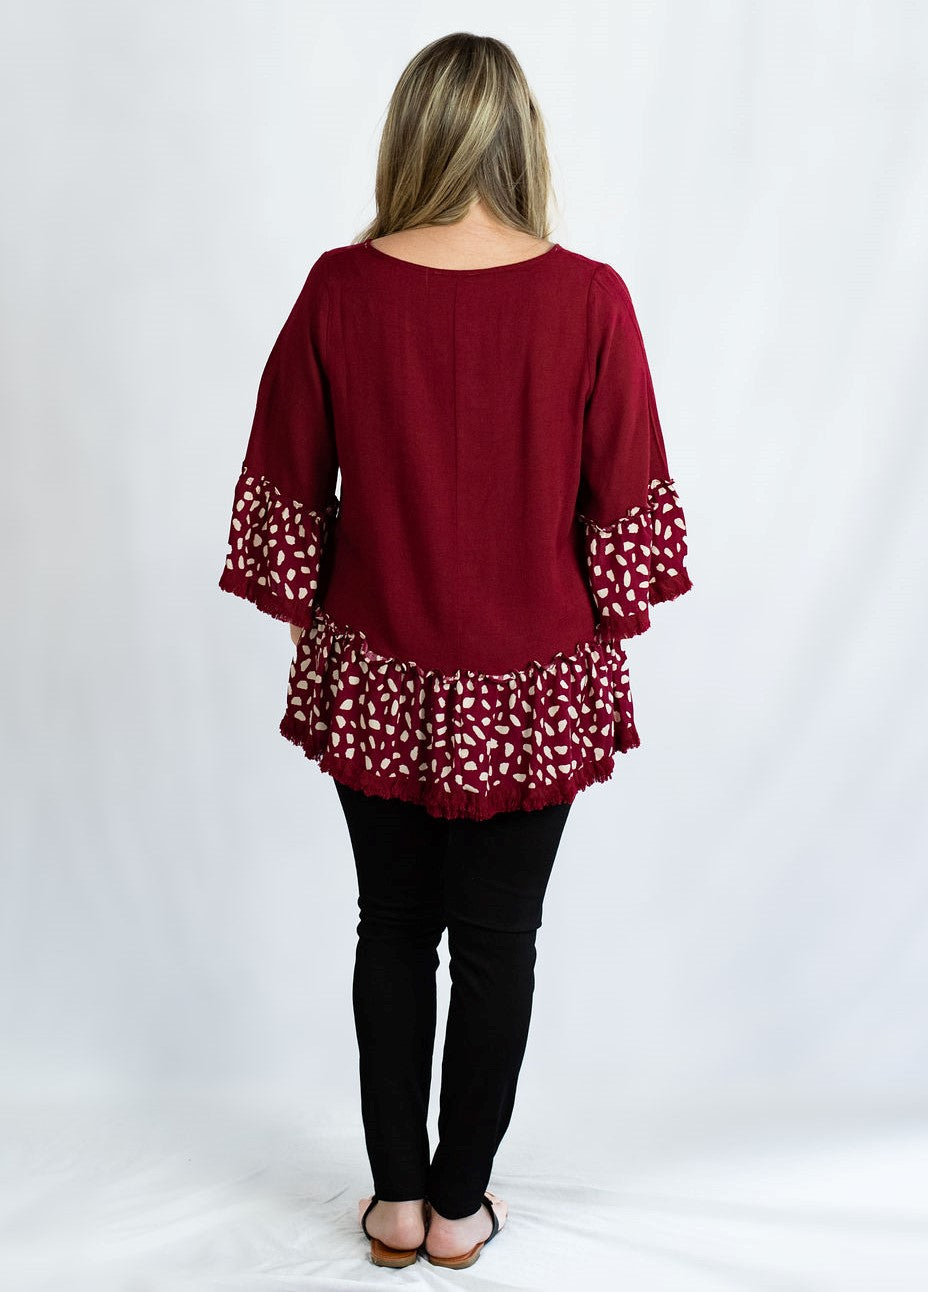 Linen Ruffled Hem Top with Animal Print Bell Sleeves by Umgee Clothing